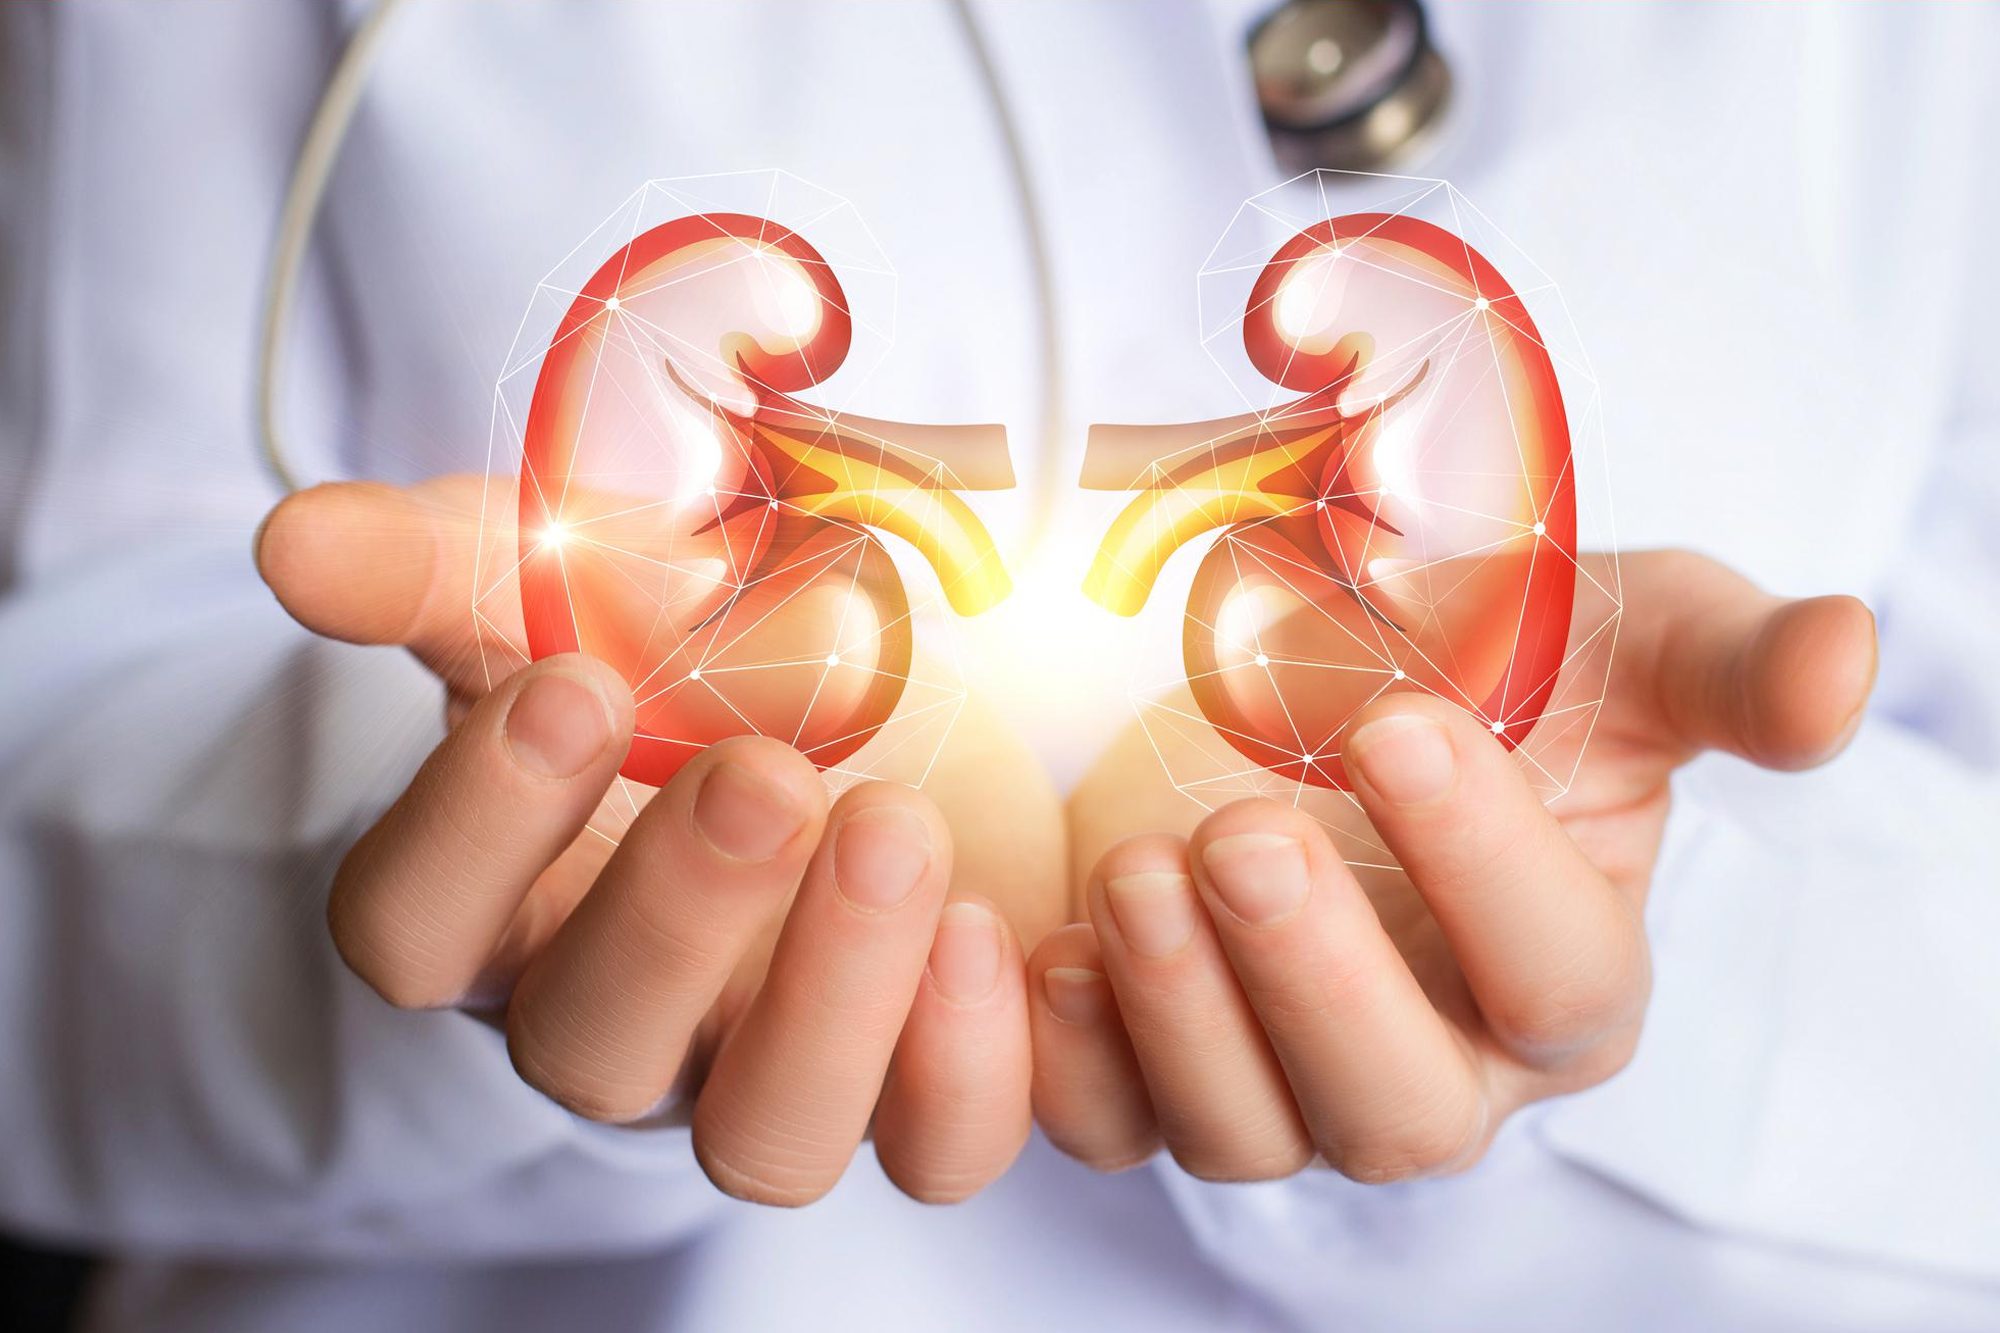 How to keep your kidneys healthy